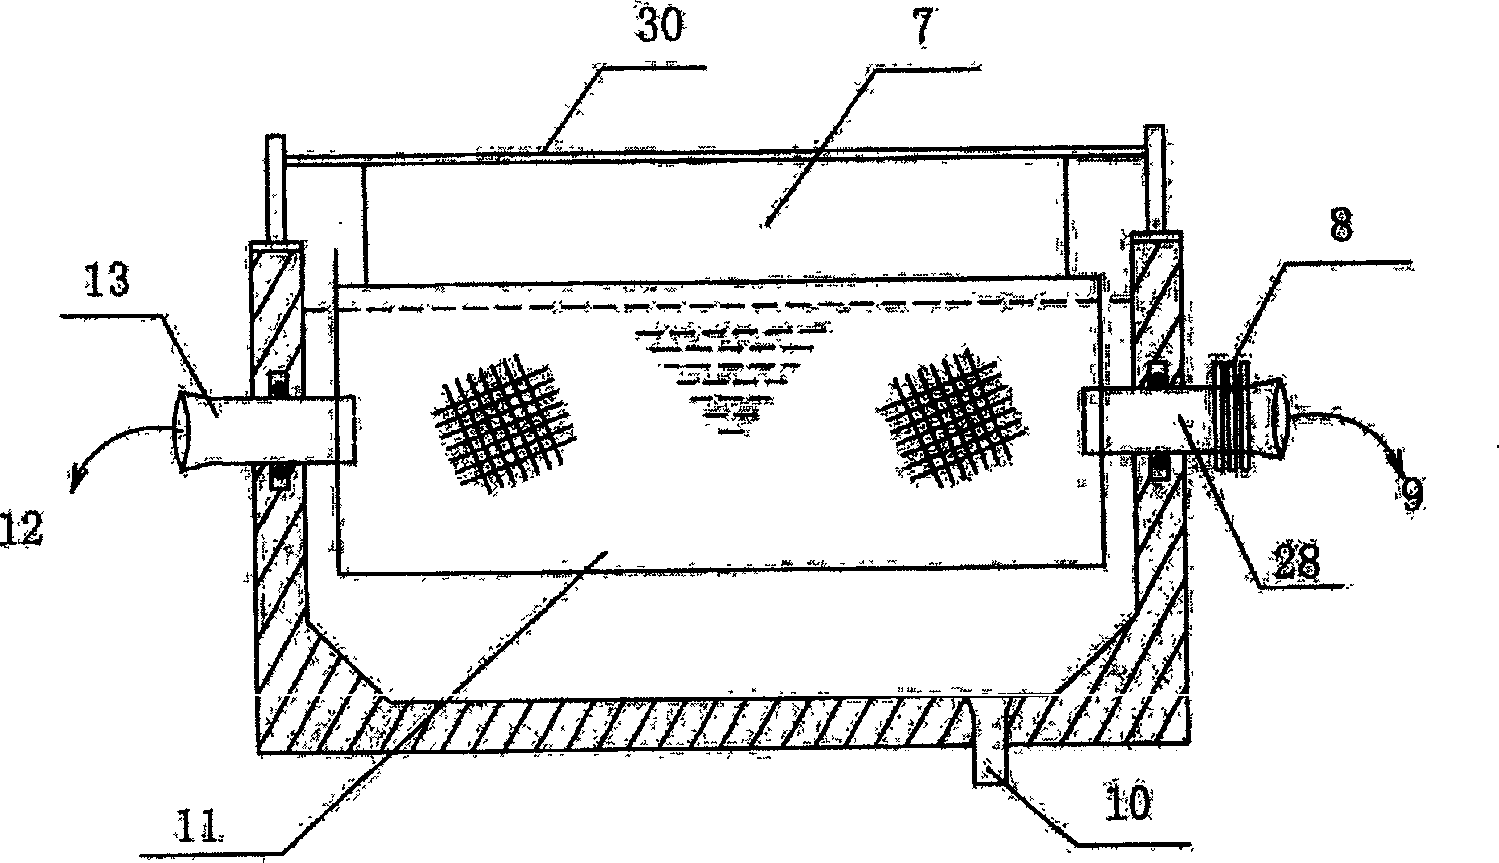 City sewage central heat supply (cold supply) device